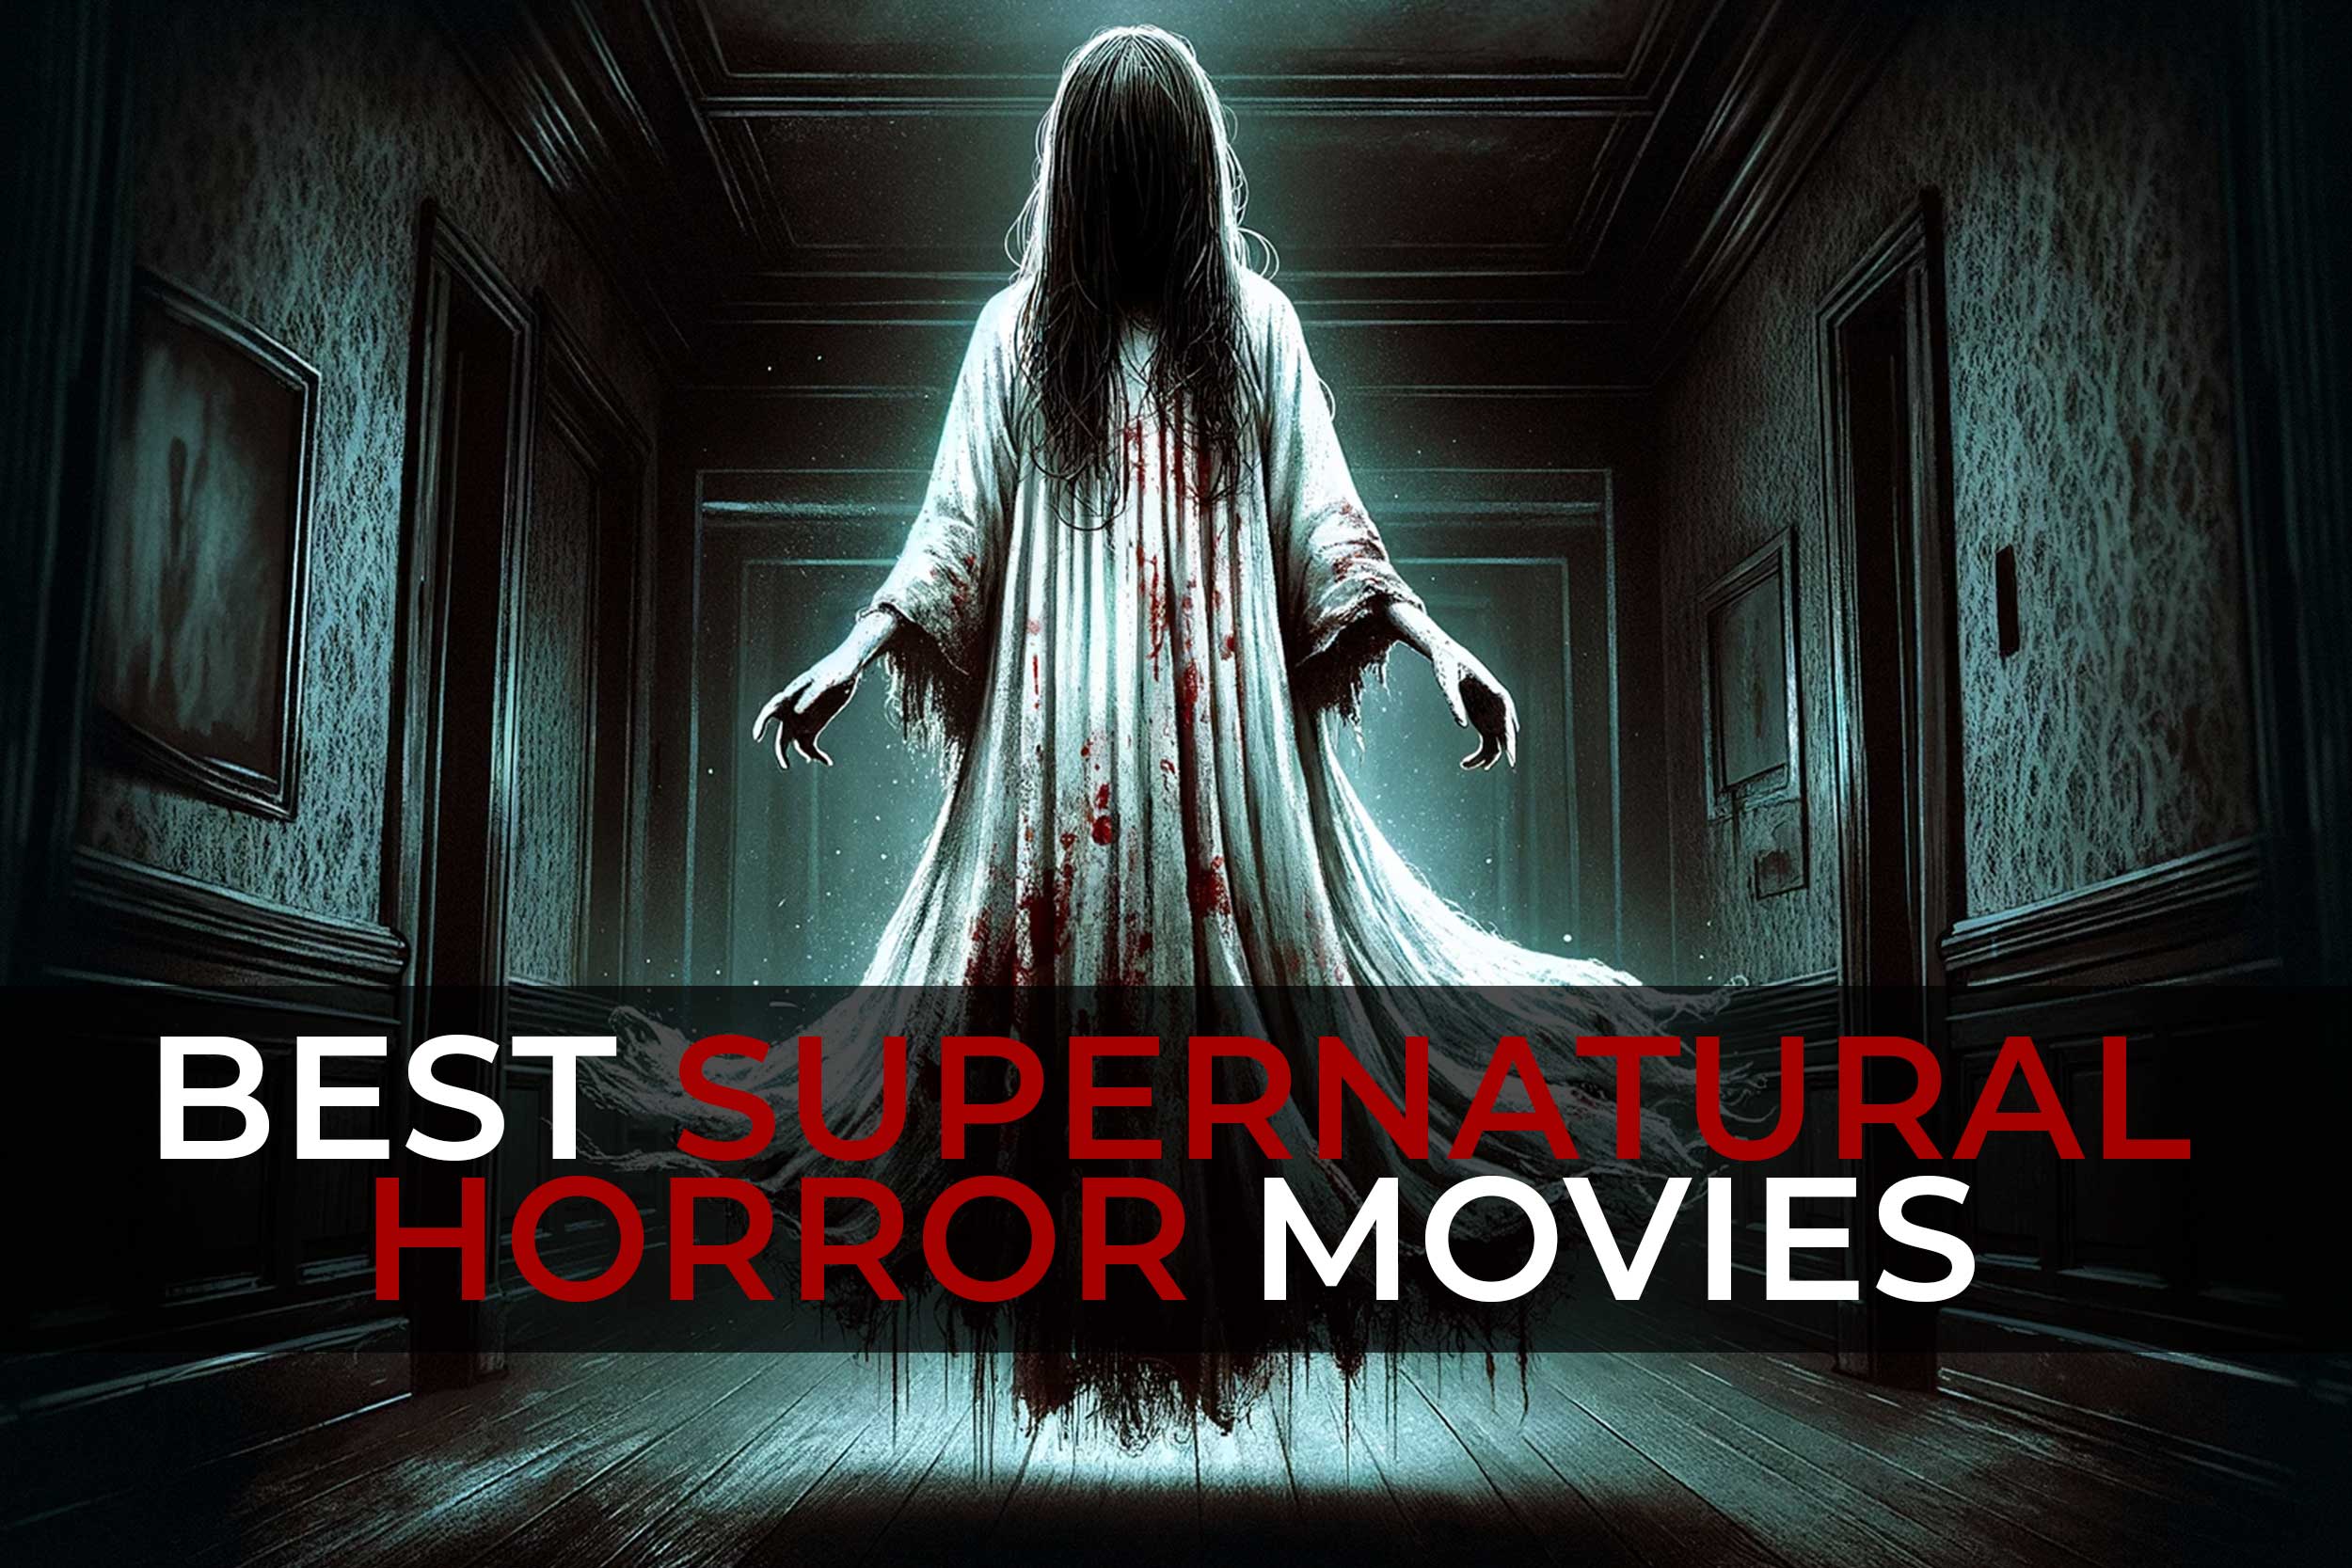 Best Supernatural Horror Movies A Guide to The Most Terrifying